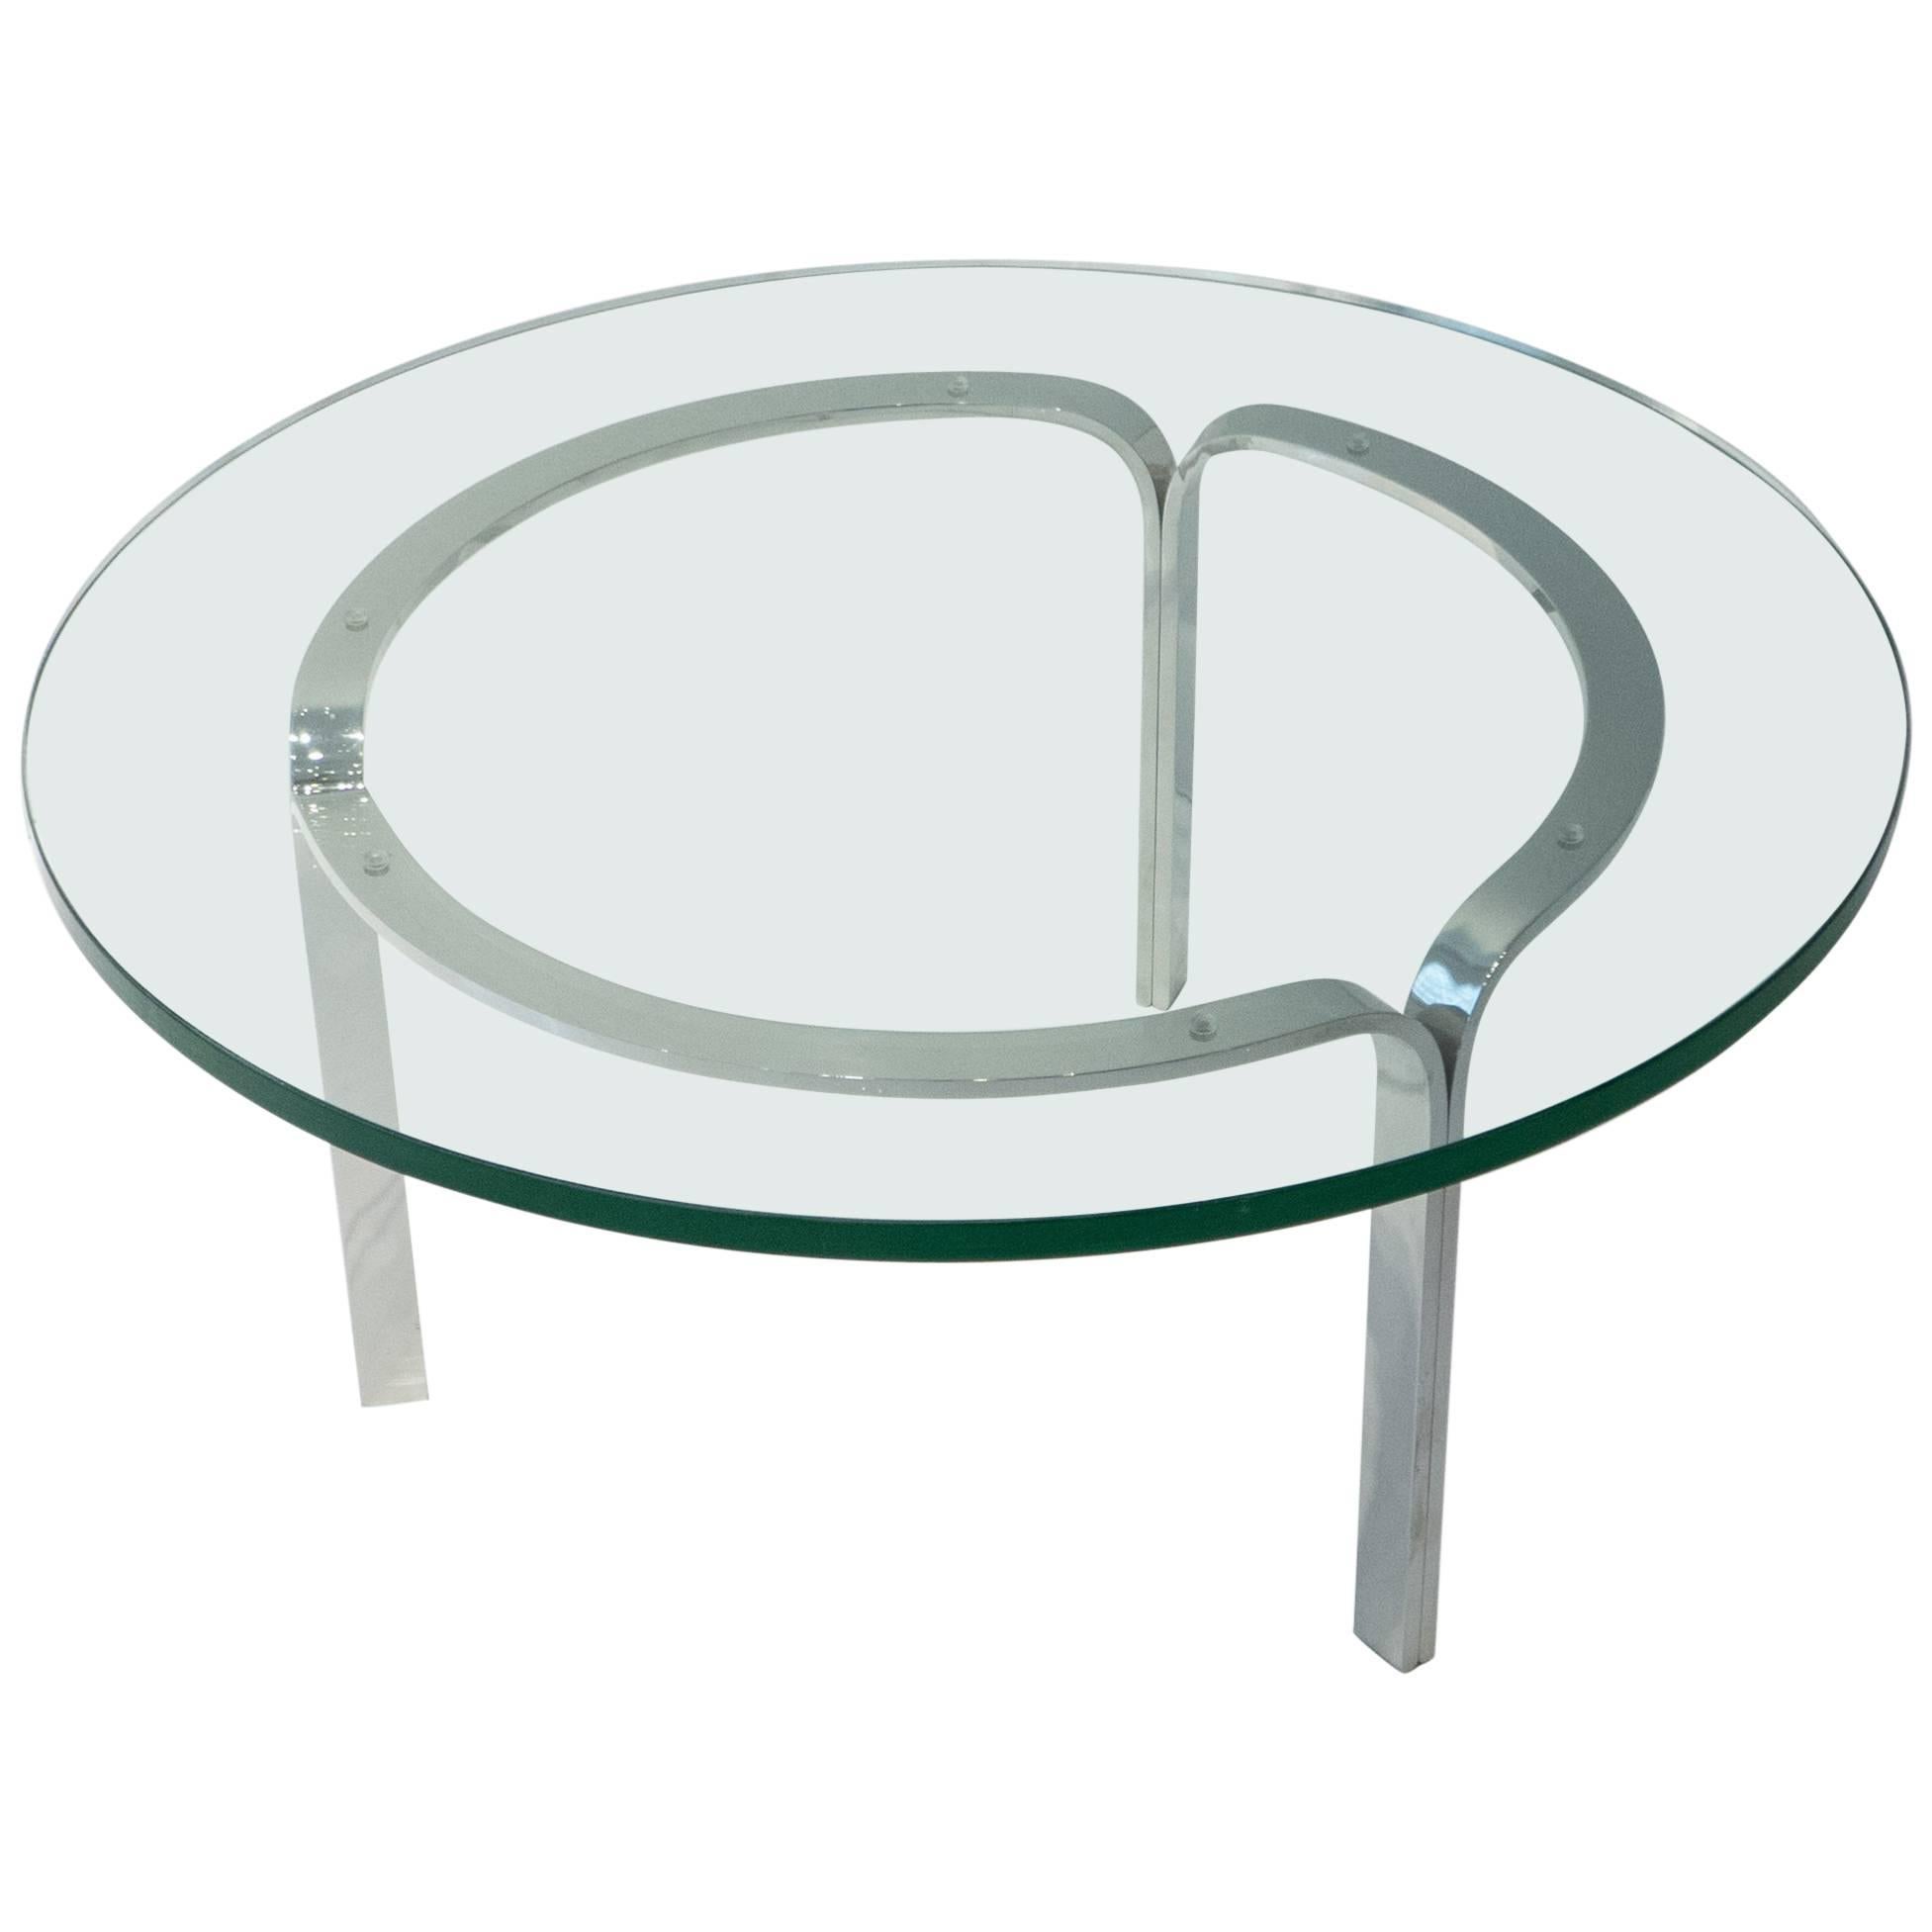 Nicos Zographos Ribbon Steel Cocktail Table